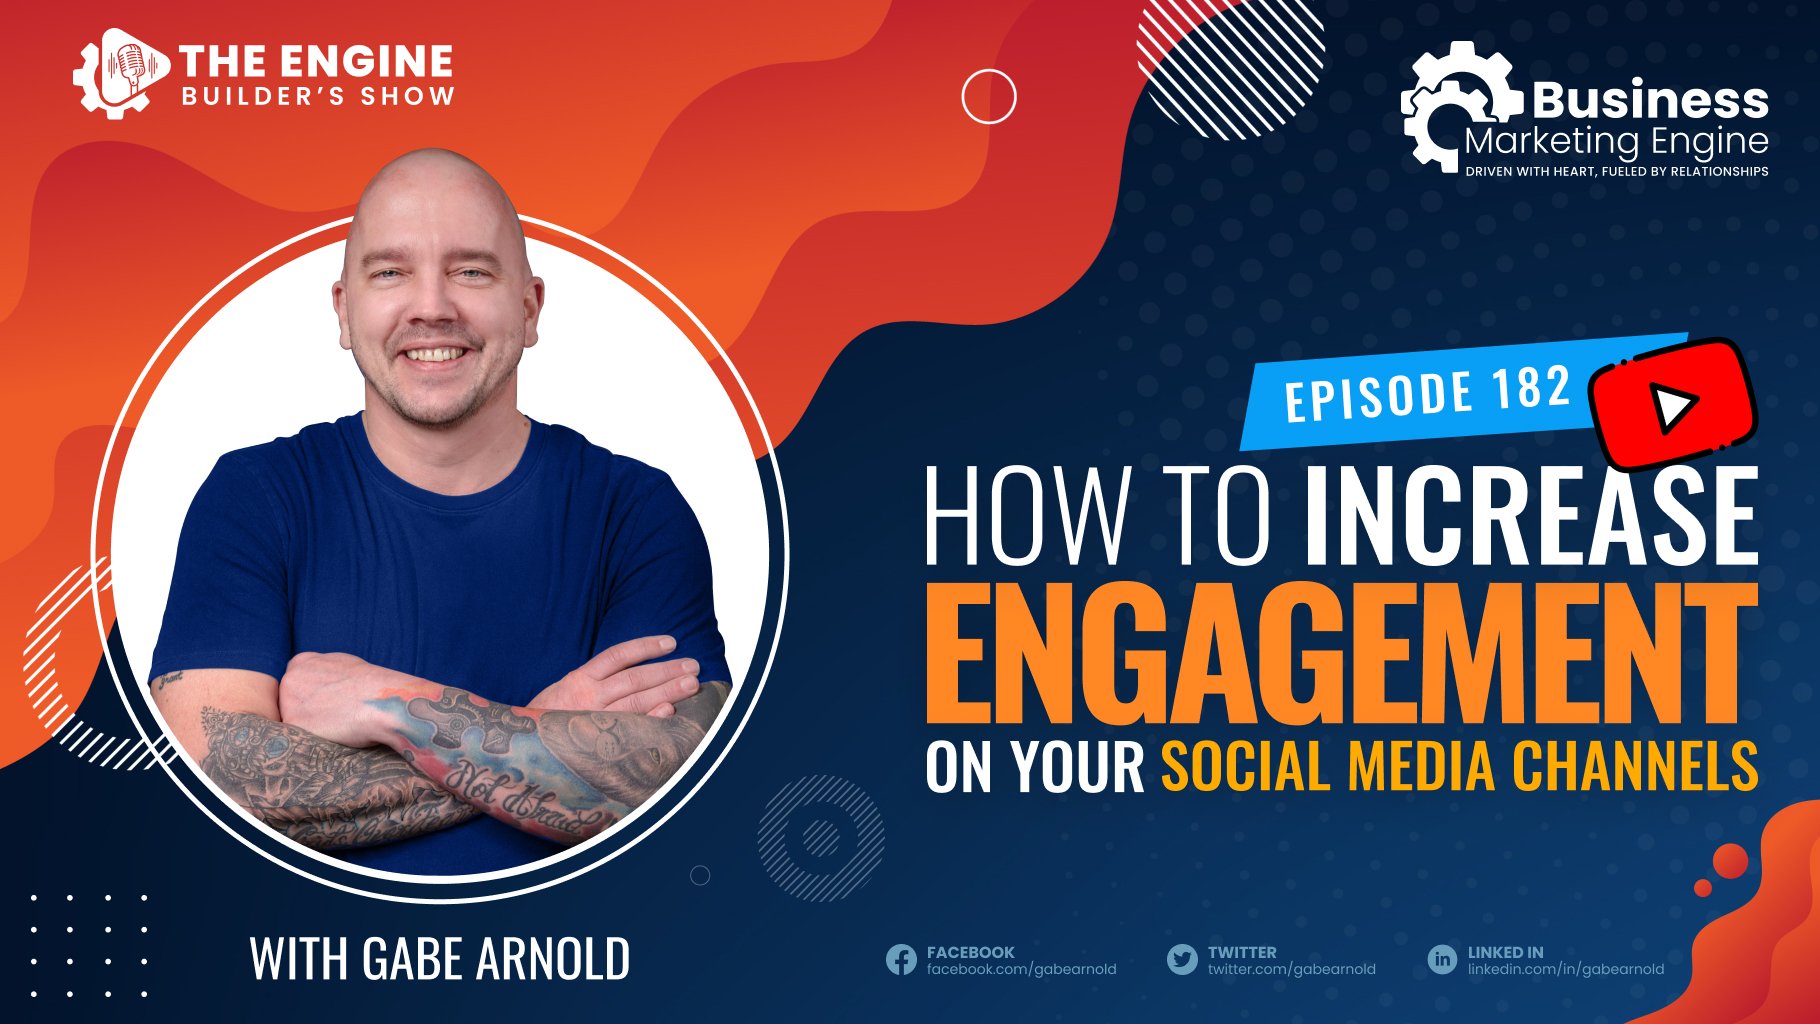 Increase Engagement on Your Social Media Channels